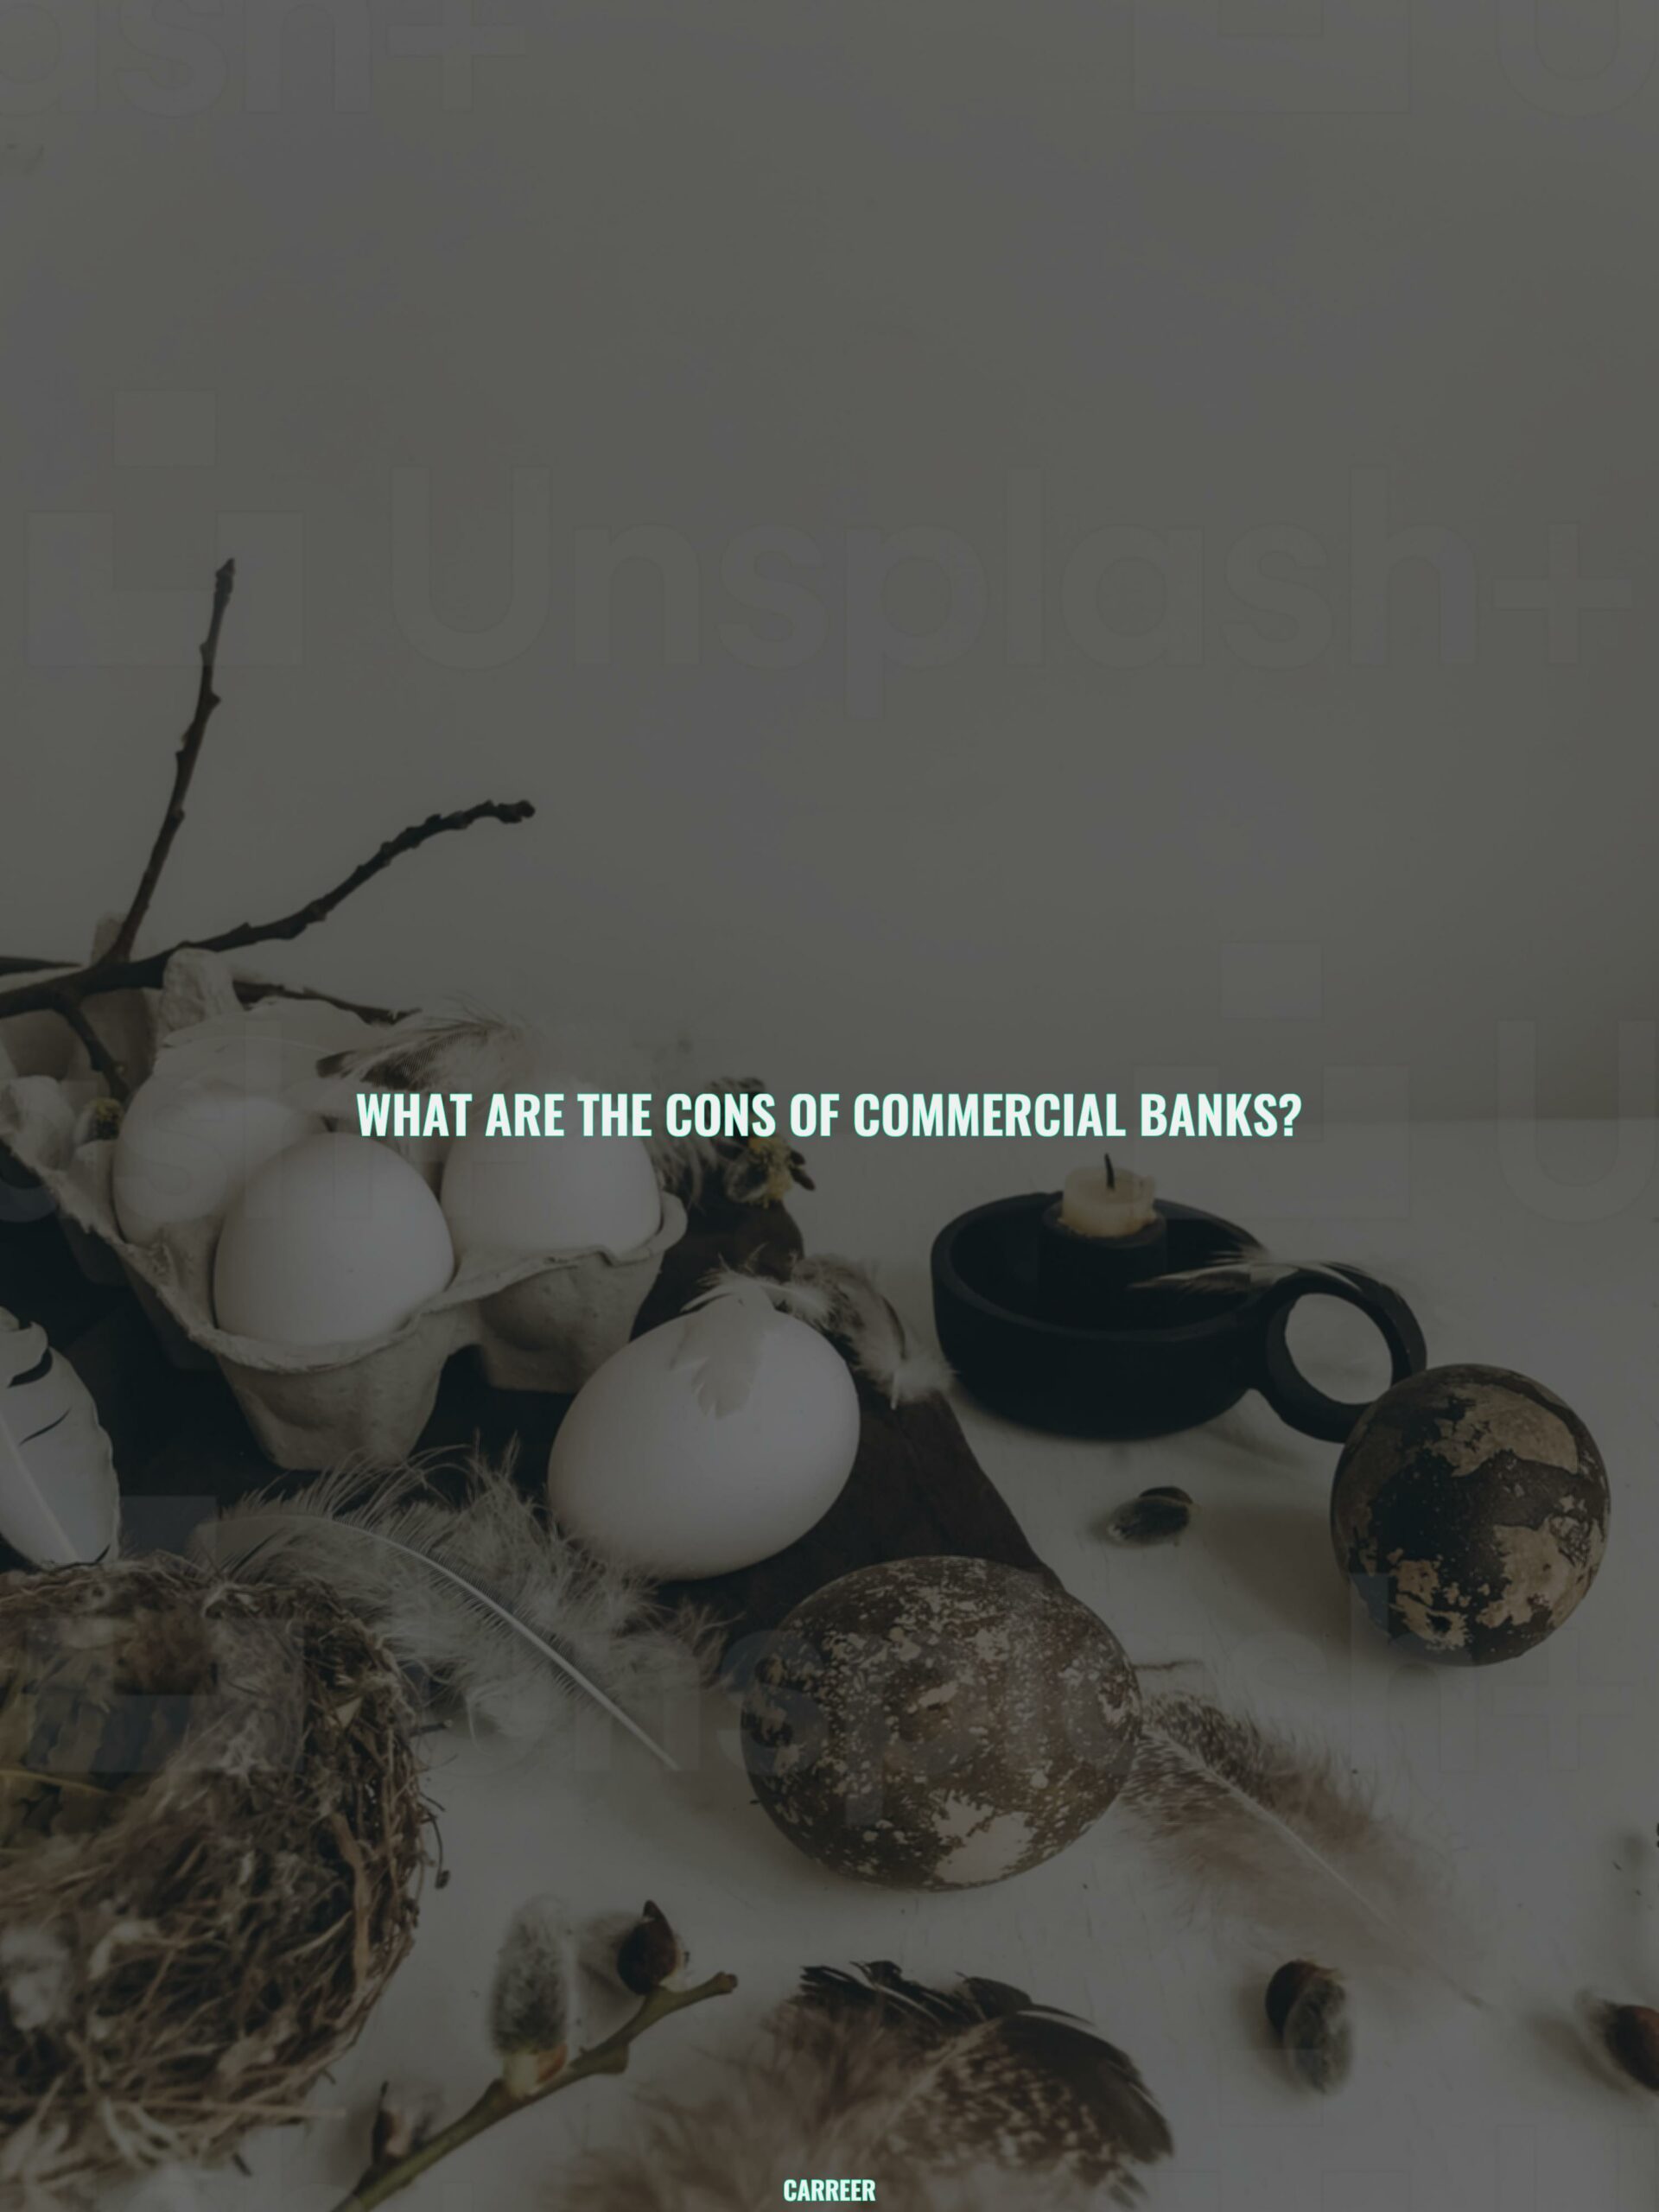 What are the cons of commercial banks?